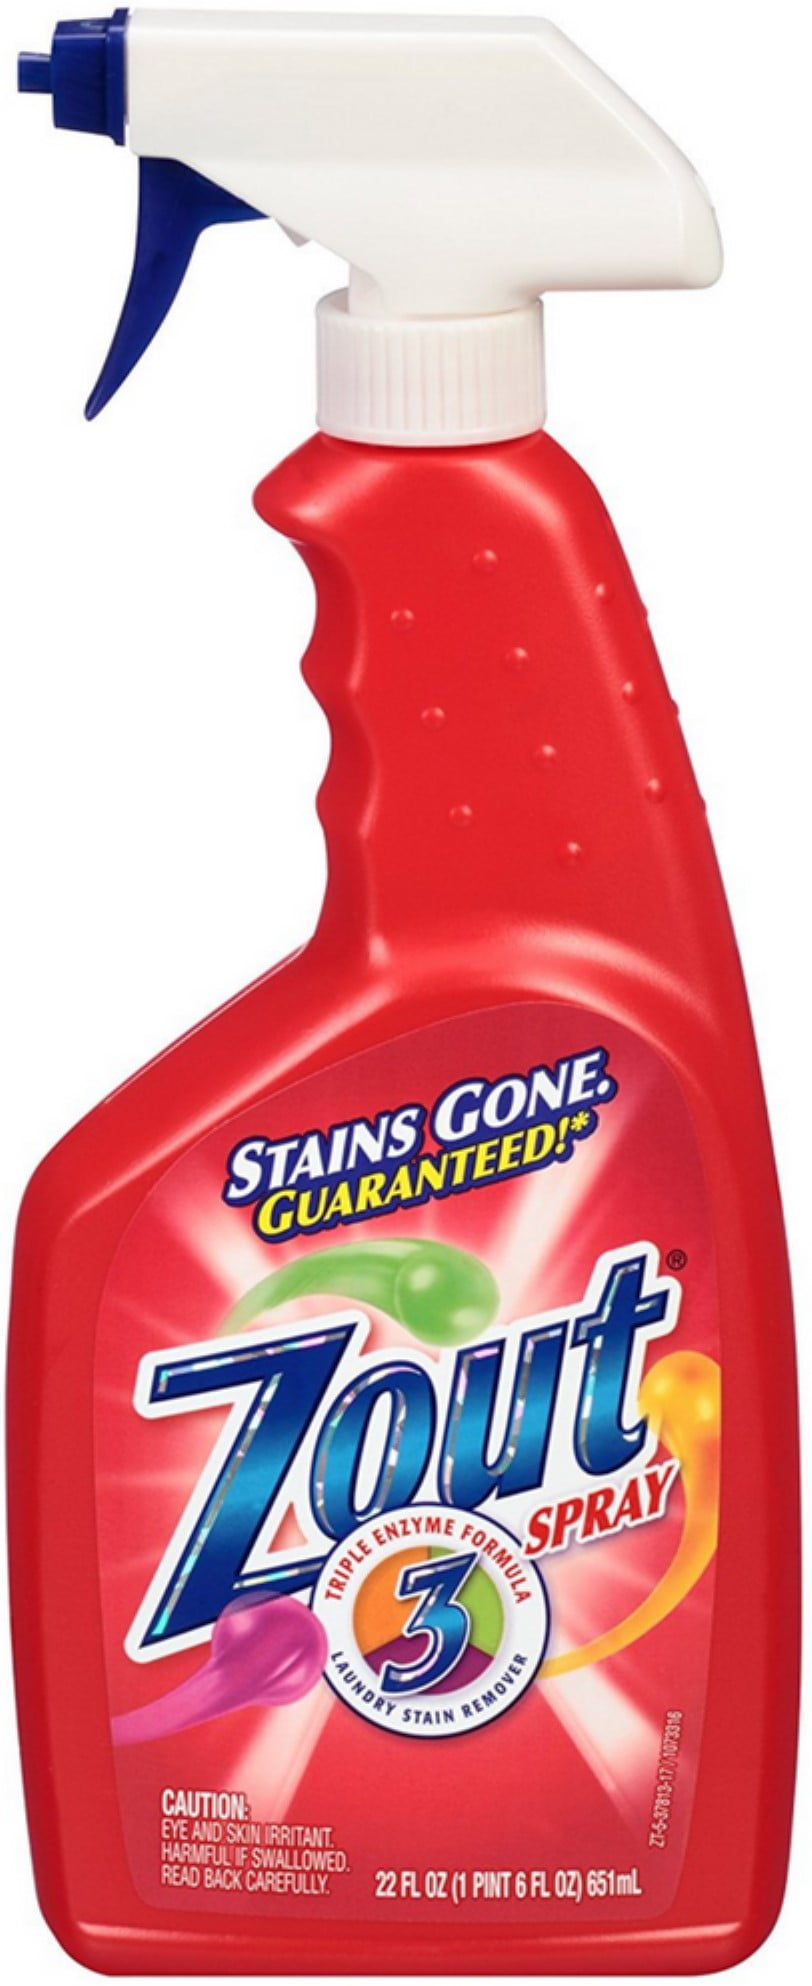 3 PACK Zout Laundry Stain Remover Triple Action. Spray 22 fl oz